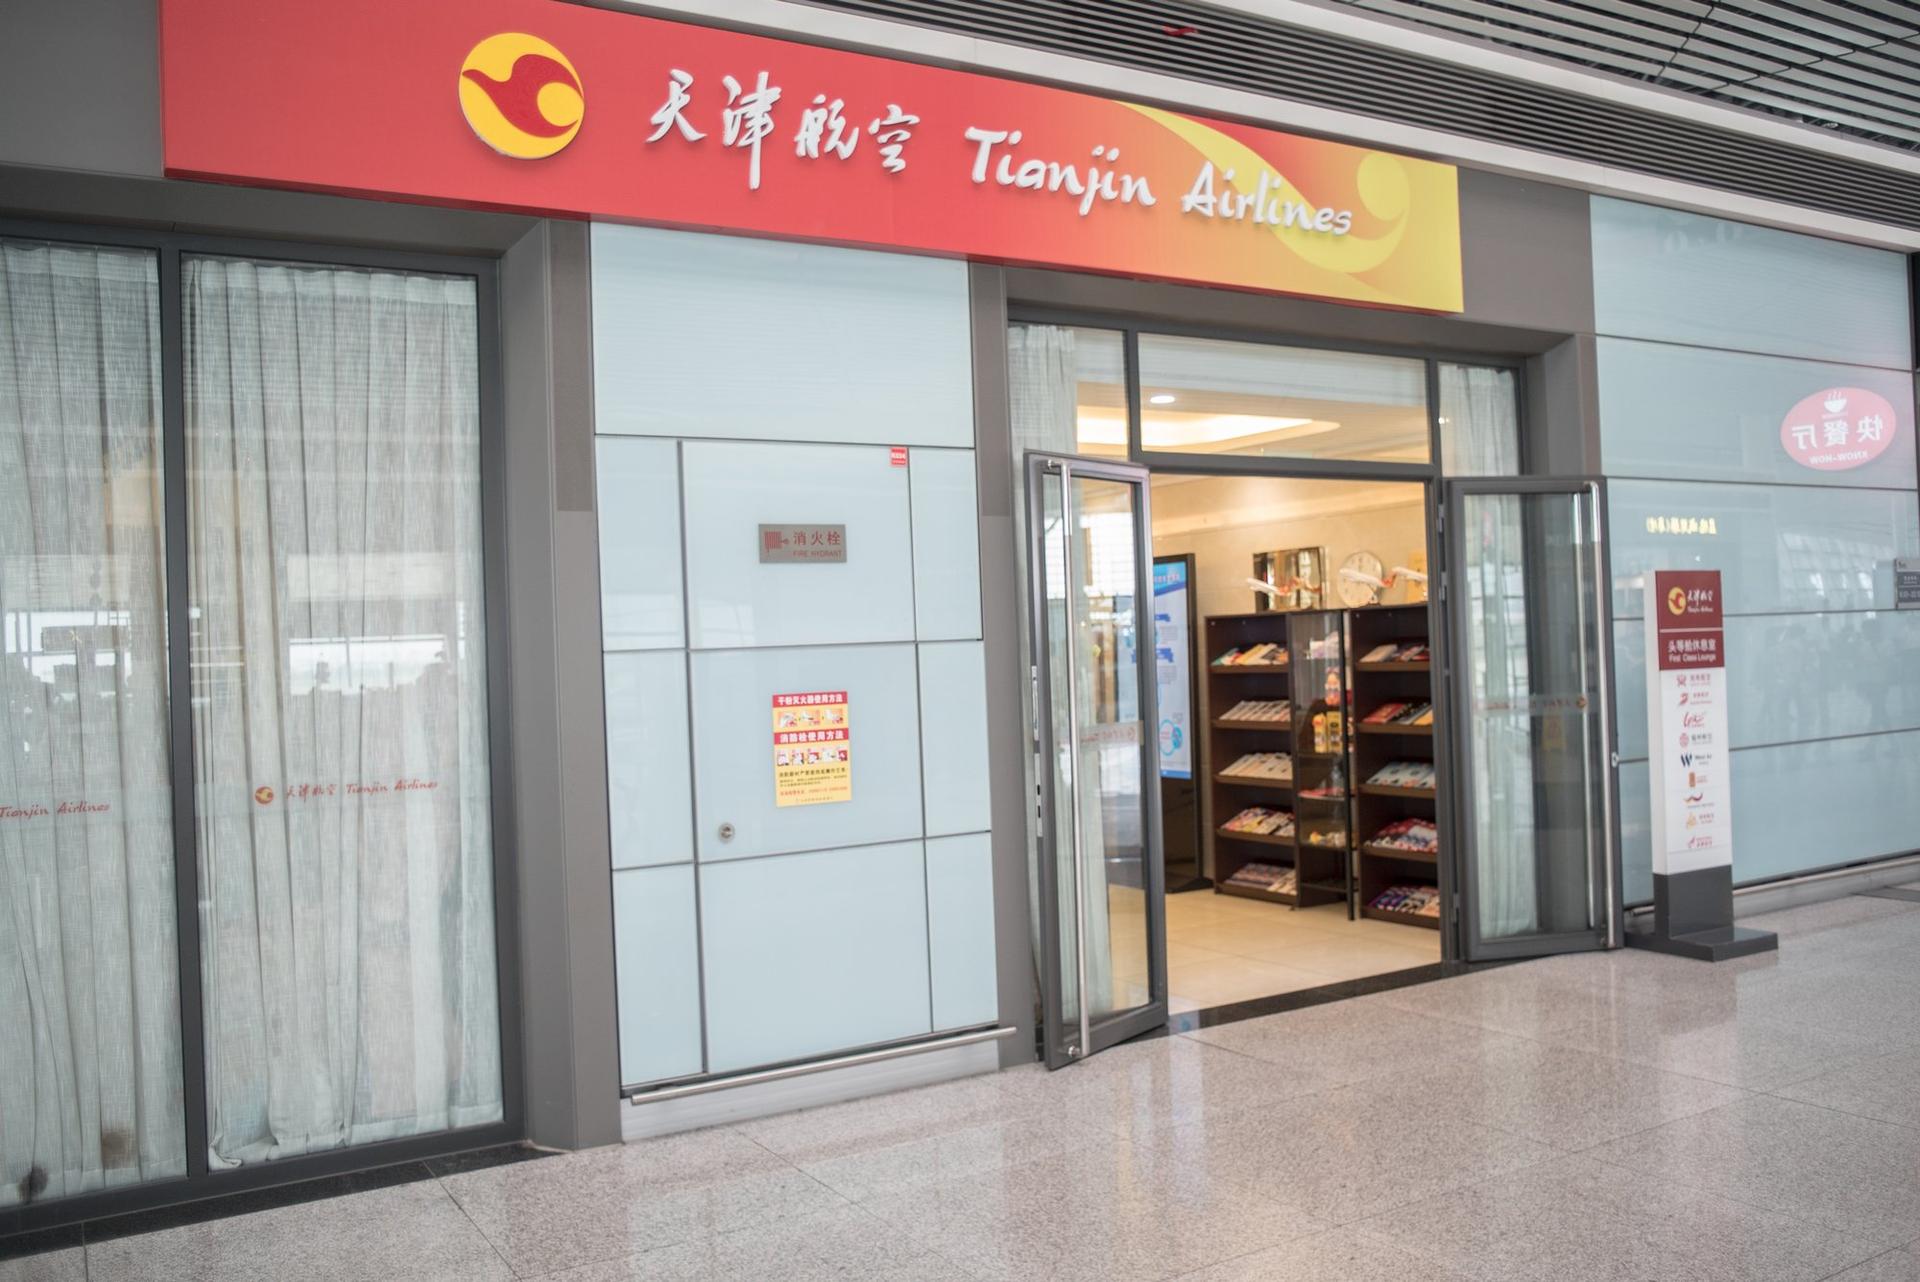 Tianjin Airlines Lounge image 4 of 13